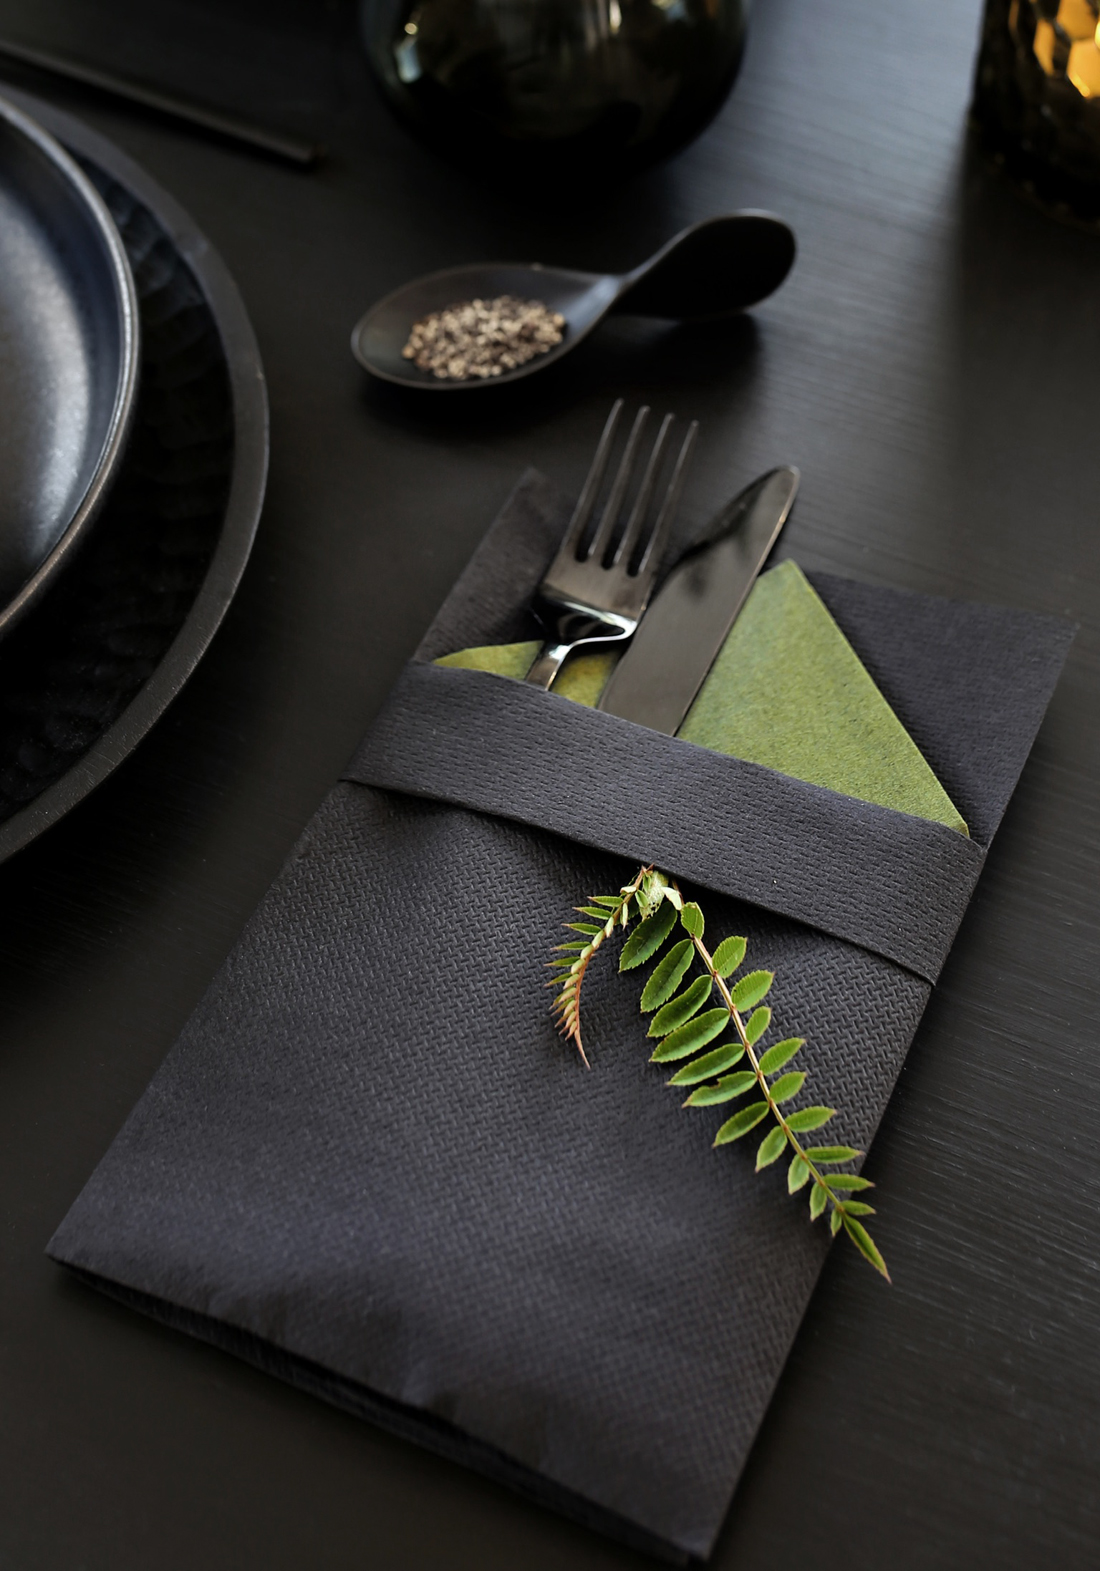 MASCULINE TABLE SETTING - Therese Knutsen